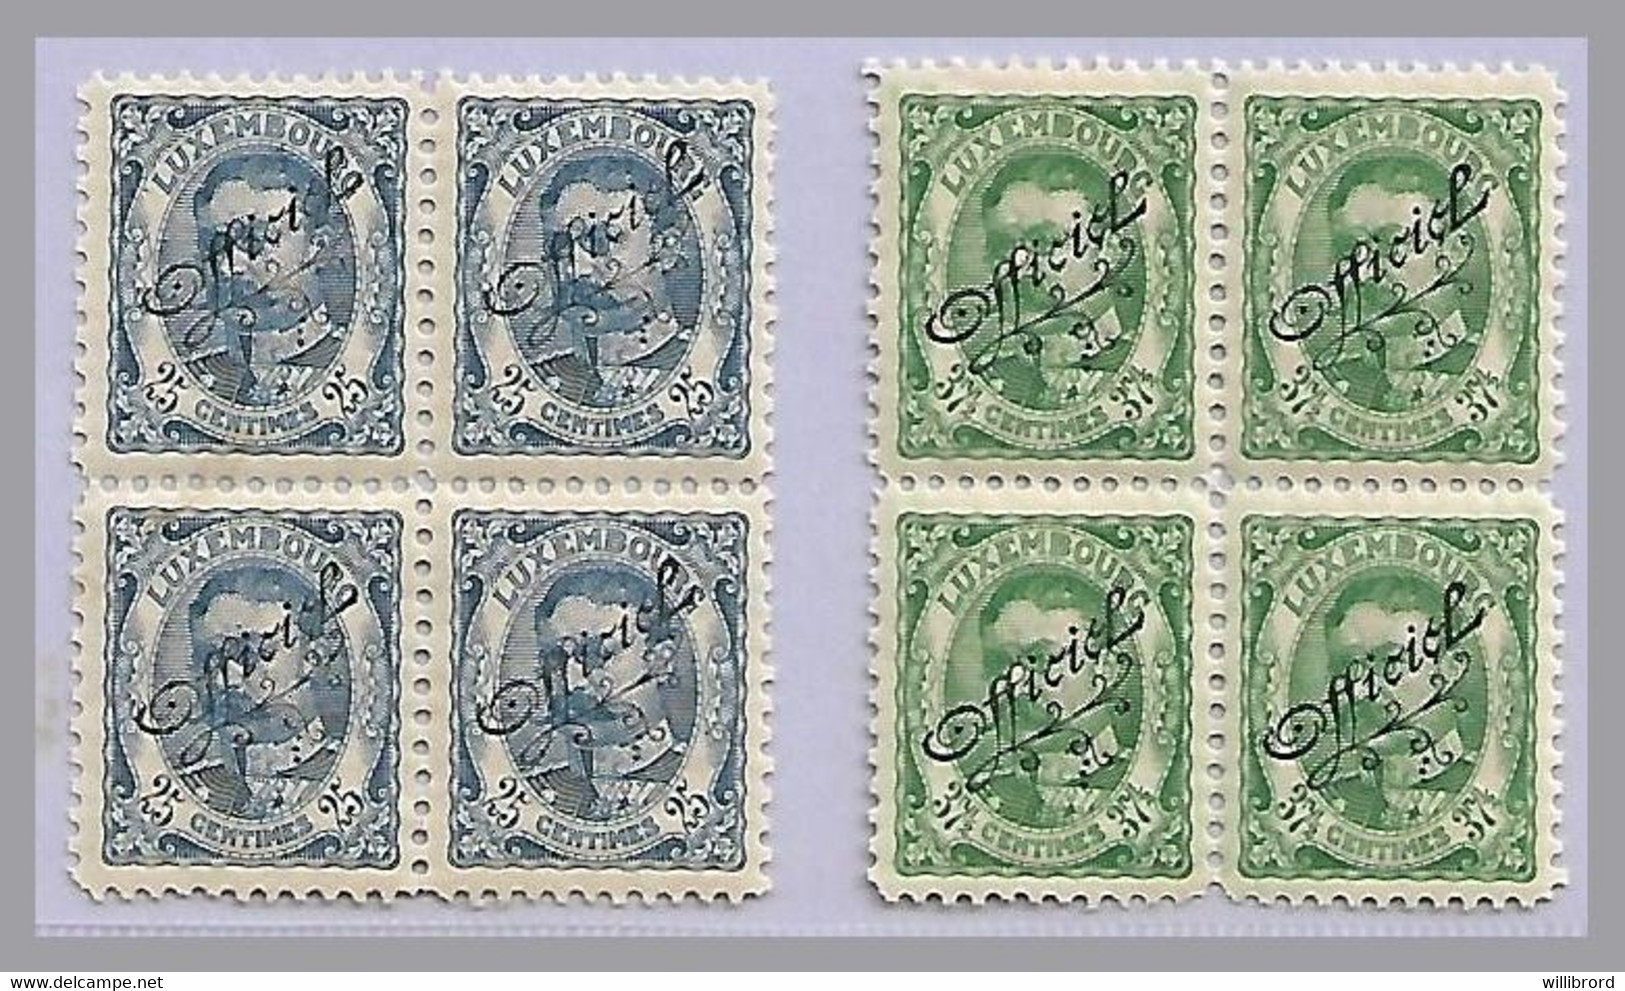 LUXEMBOURG - G.D. William IV OFFICIALS  - 25c & 37½c Blocks Of 4 - Mint Never Hinged - 1906 William IV